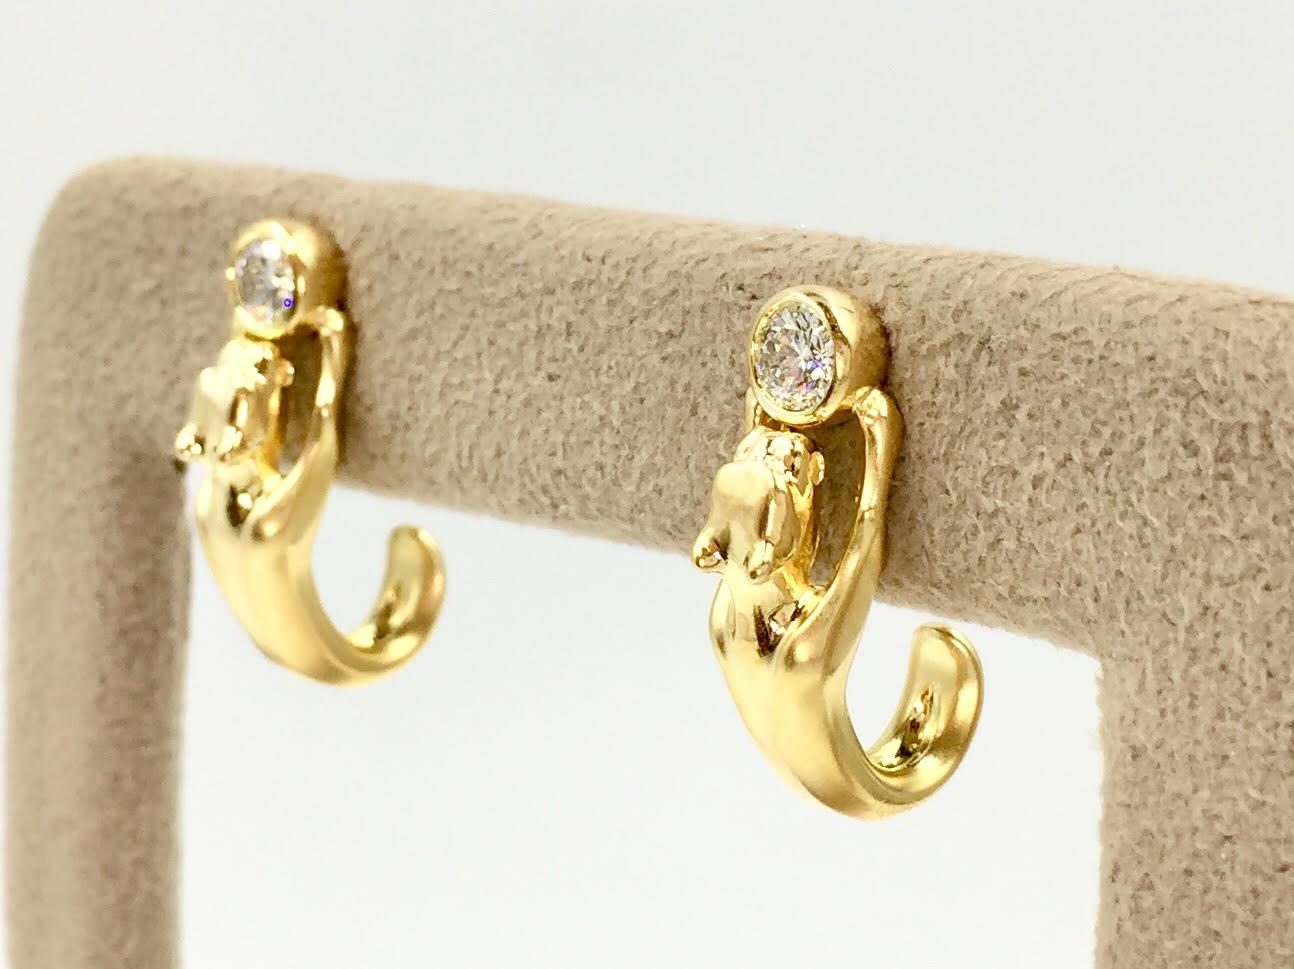 Made with fine craftsmanship, these unusual 18k yellow gold panther cat earrings make a statement while still considered an every day earring. Beautiful satin finish over the body of the panther. Bezel set round brilliant diamonds have a total